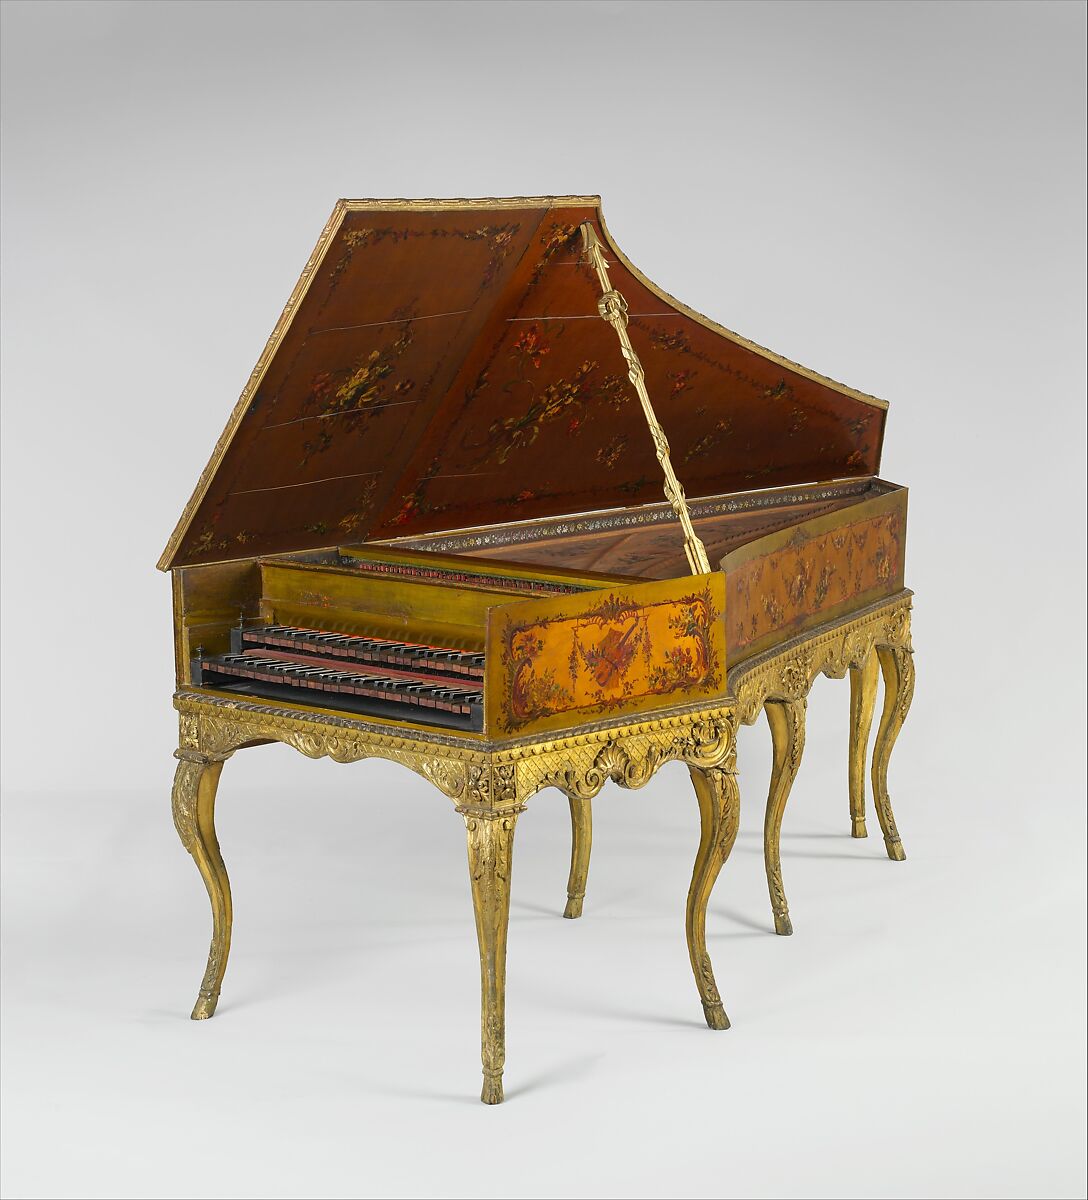 Harpsichord, Louis Bellot (Paris, active 1717–1759), Wood and various materials, French 